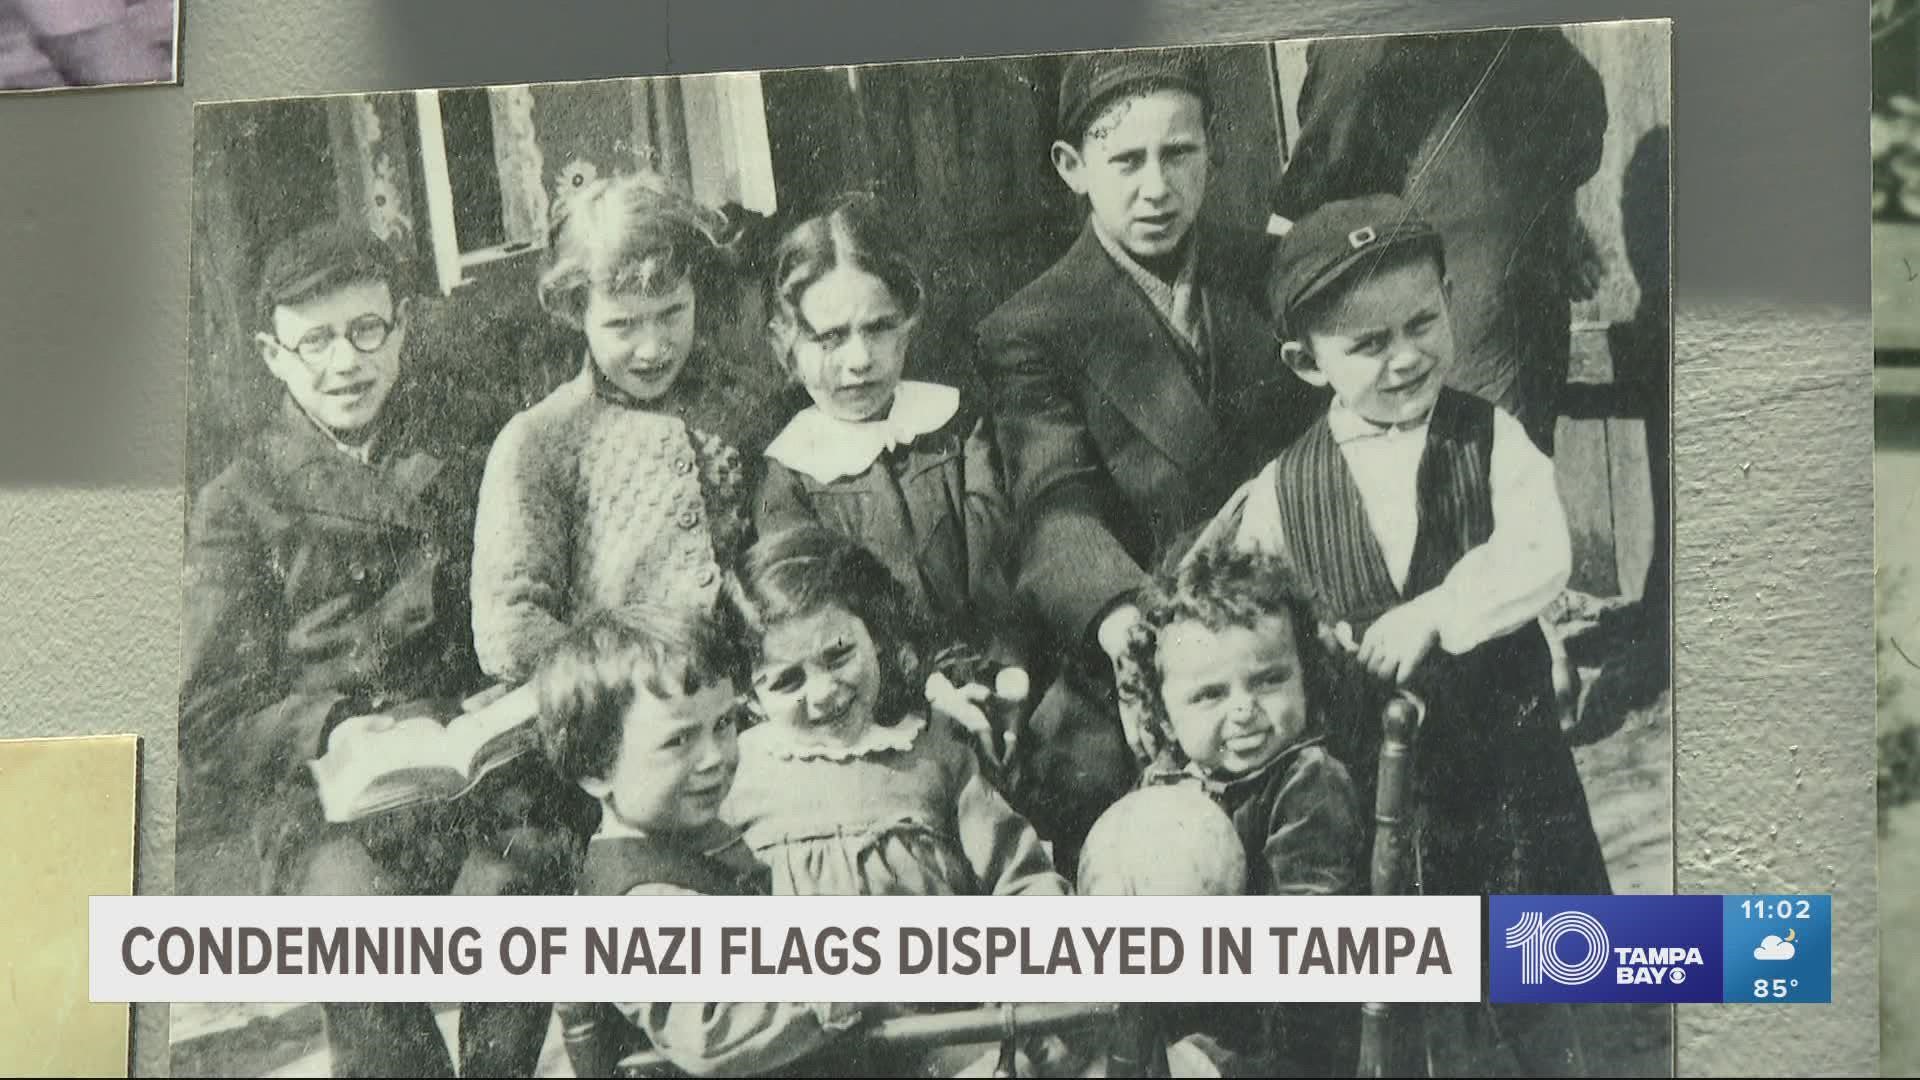 Pictures of demonstrators with antisemitic flags and symbols of hate were sent to the museum by people near the Tampa Convention Center.